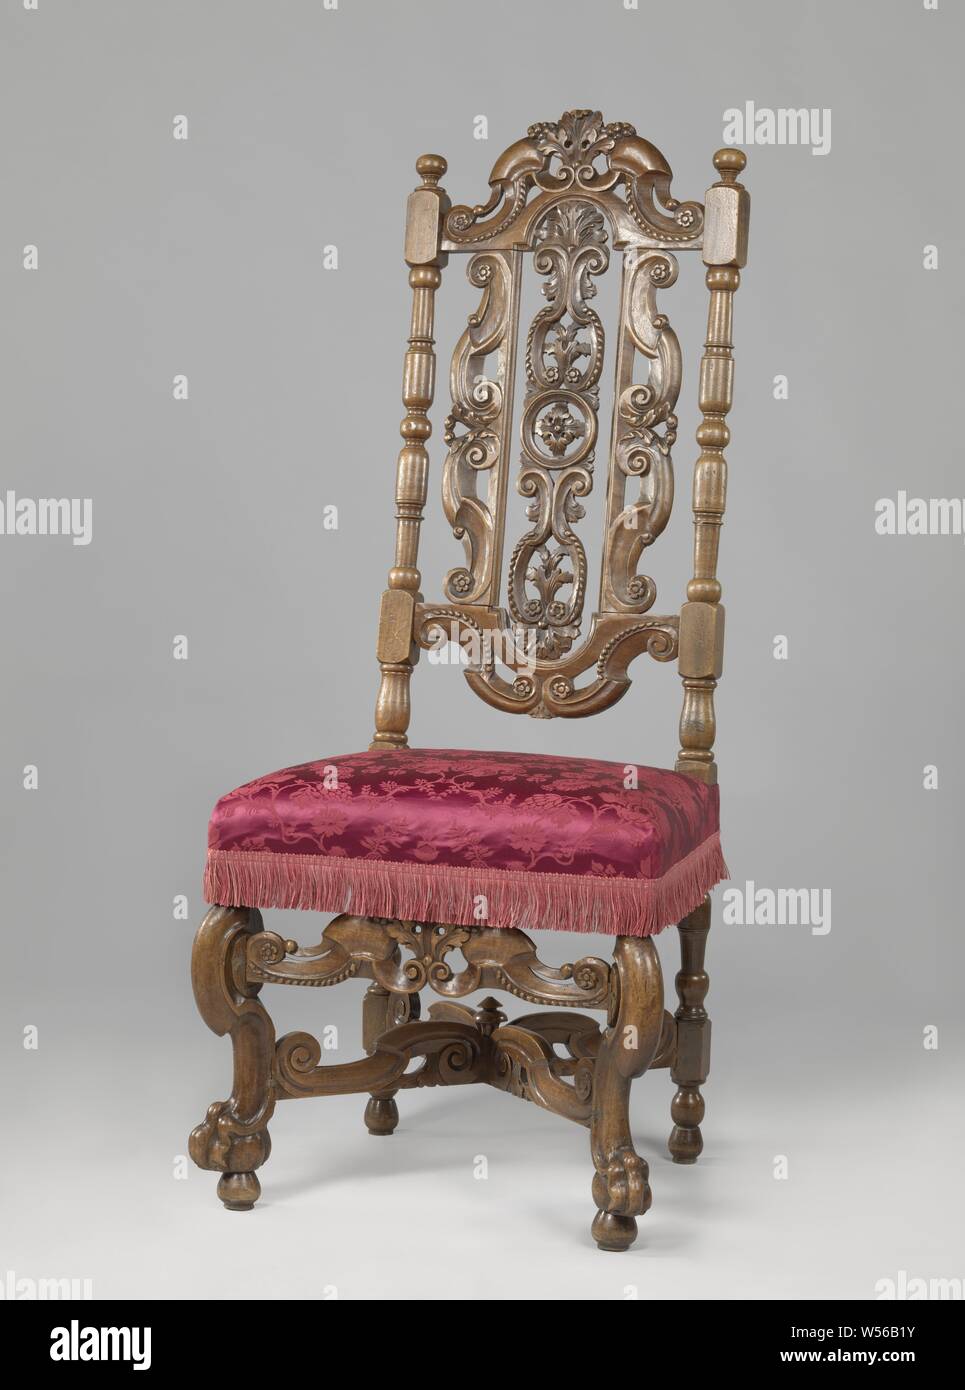 Chair with angled front legs, X-shaped cross, upholstered with flower pattern, Walnut chair, covered in bronze-colored pressed fabric flower pattern. The chair has angled front legs in the shape of broken S-volutes and rests on lion's claws that include spheres. The X-shaped cross has broken S-volutes, as well as the front cover. There is a button at the intersection. The high, open-worked back also shows S-volutes. The elongated center piece is decorated with circle and rosette in the middle and above and below with acanthus leaves and rosettes., anonymous, Netherlands, 1685 - 1700, walnut Stock Photo